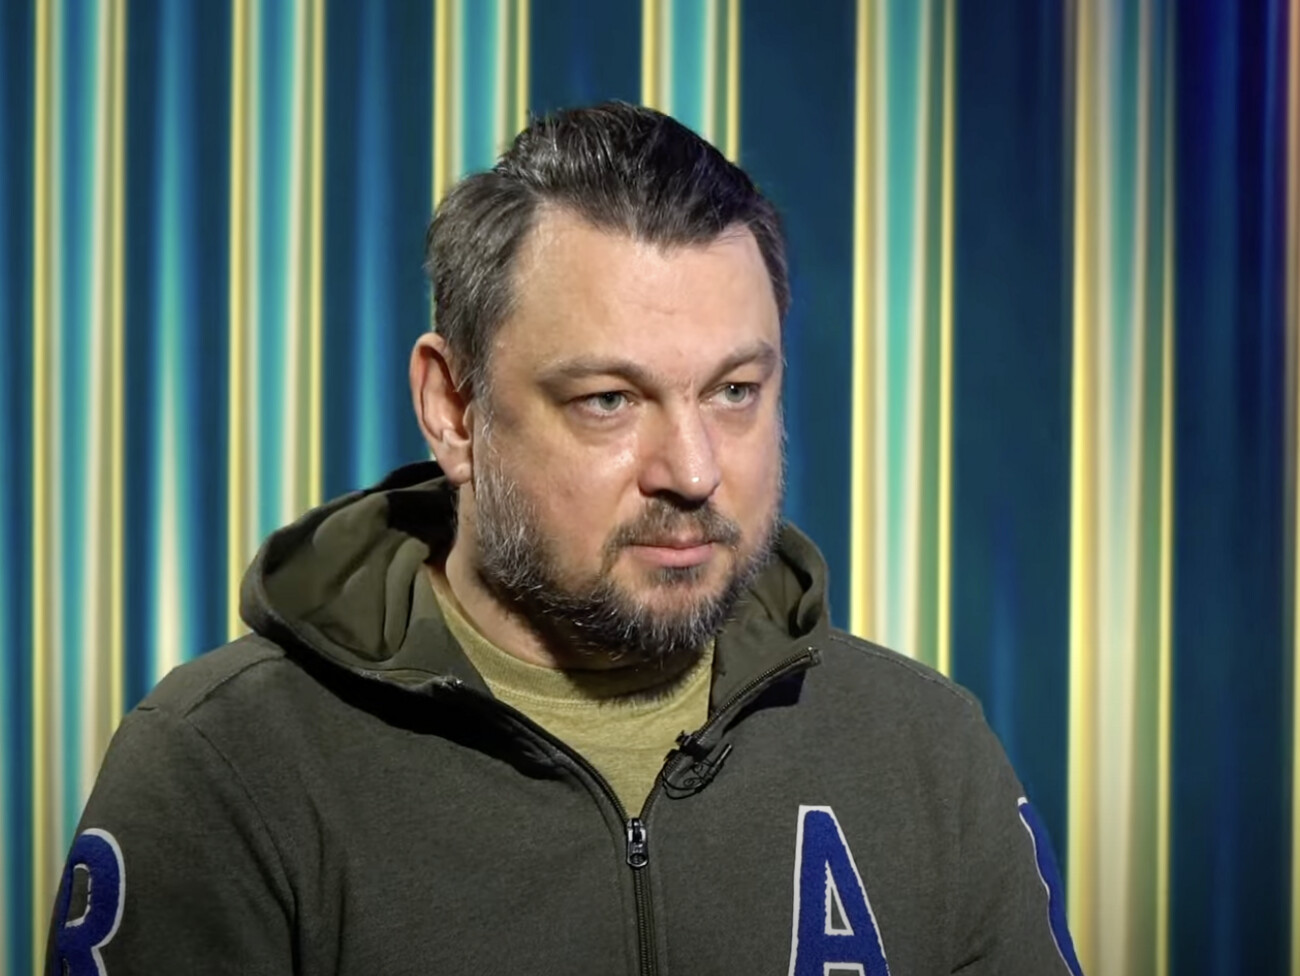 Journalist Liamets: How can you tell the difference between a pro-Russian and a pro-Ukrainian owner of a company? In my opinion, the marker today is the assistance of the Armed Forces